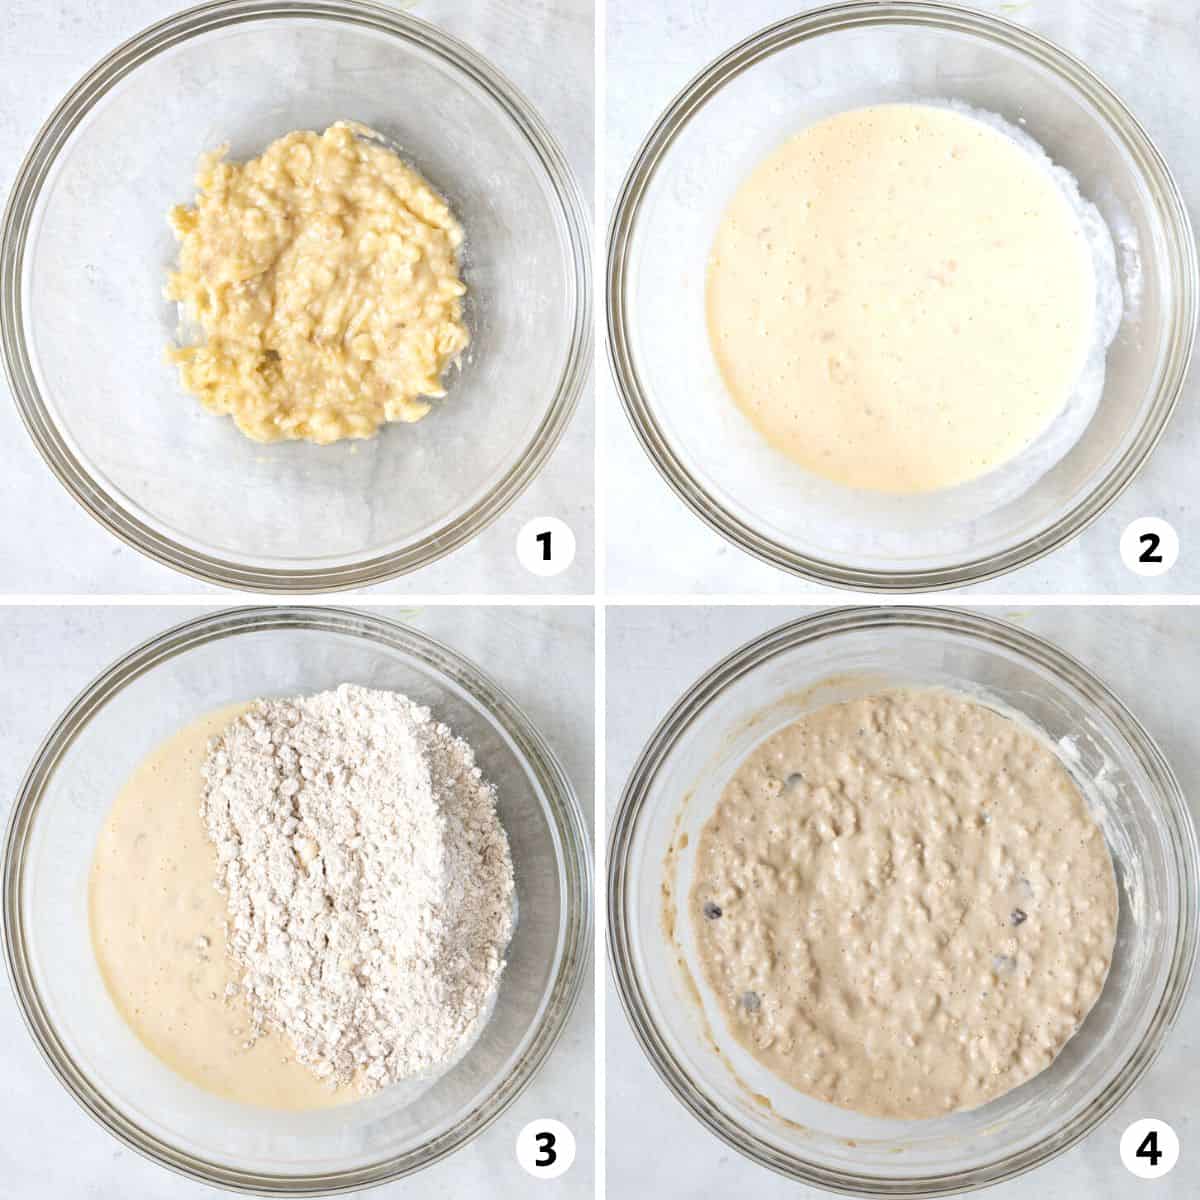 4 image collage of making recipe in one bowl: 1 mashing bananas, 2 liquid ingredients mixed in, 3 dry ingredients added on top, and 4 everything combined.